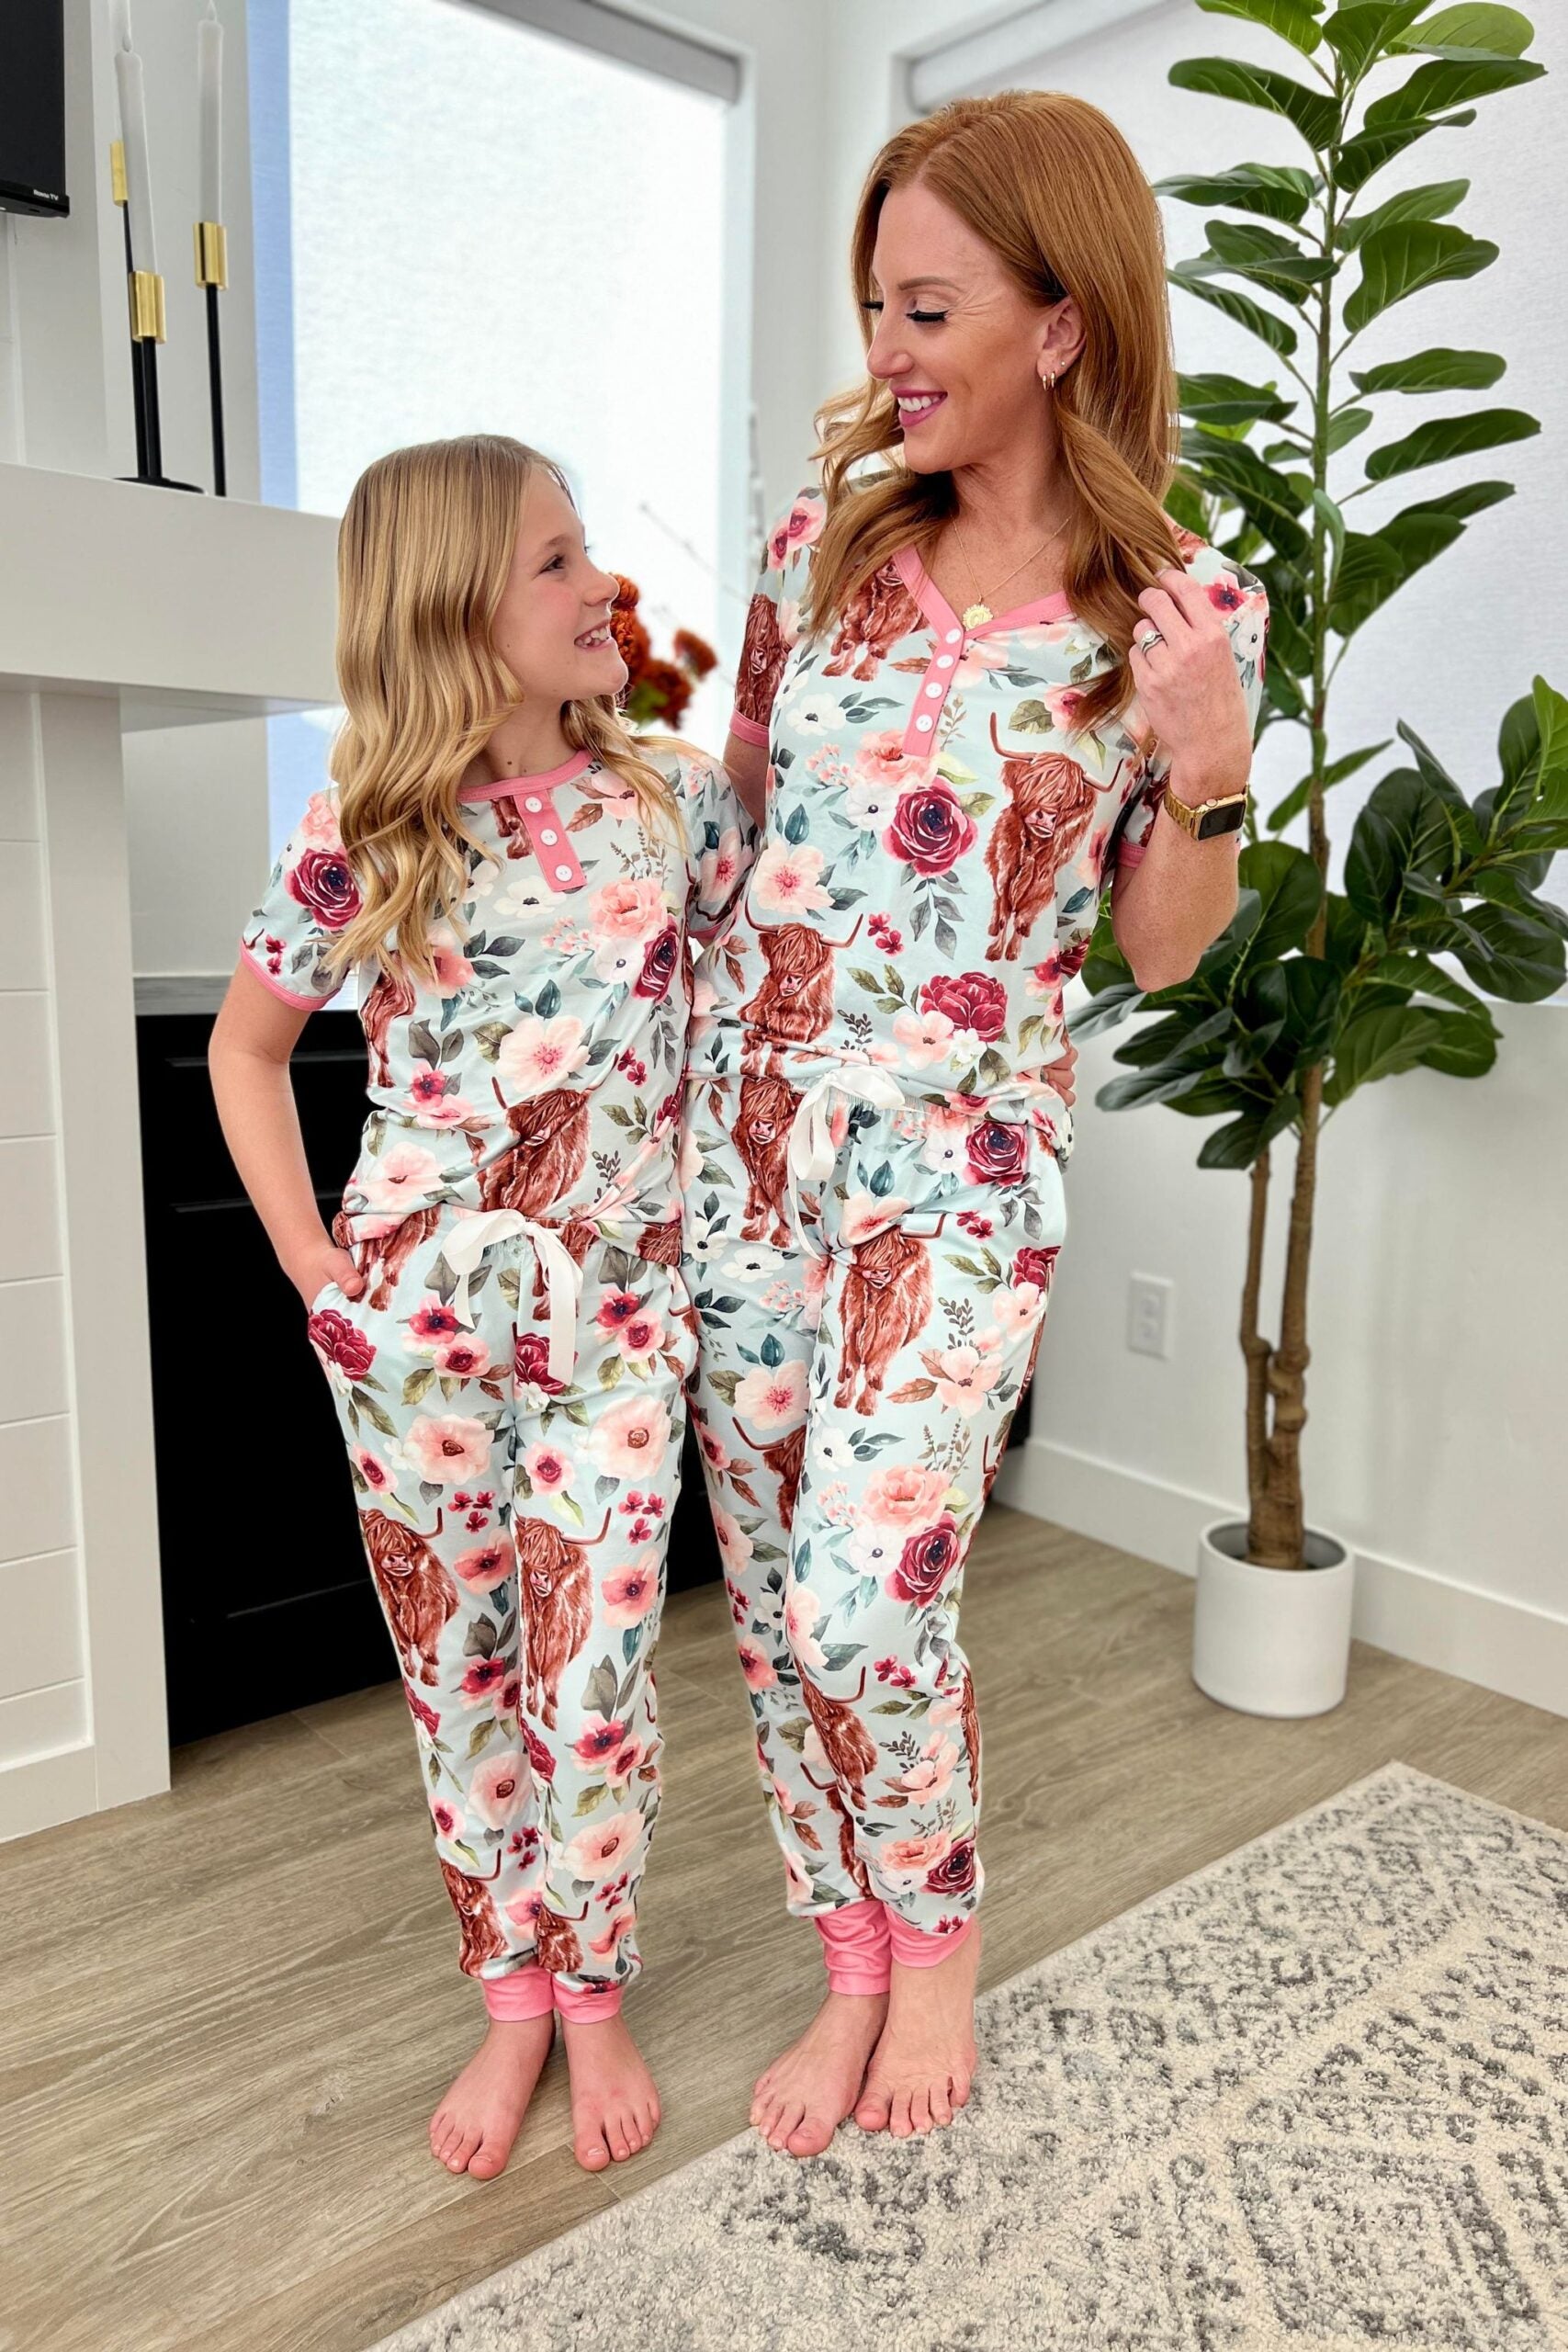 ***PRE-ORDER*** Shirley Mom & Me Jogger PJ Set - Highland Cow (Women's and Kids') - Shipping Early April